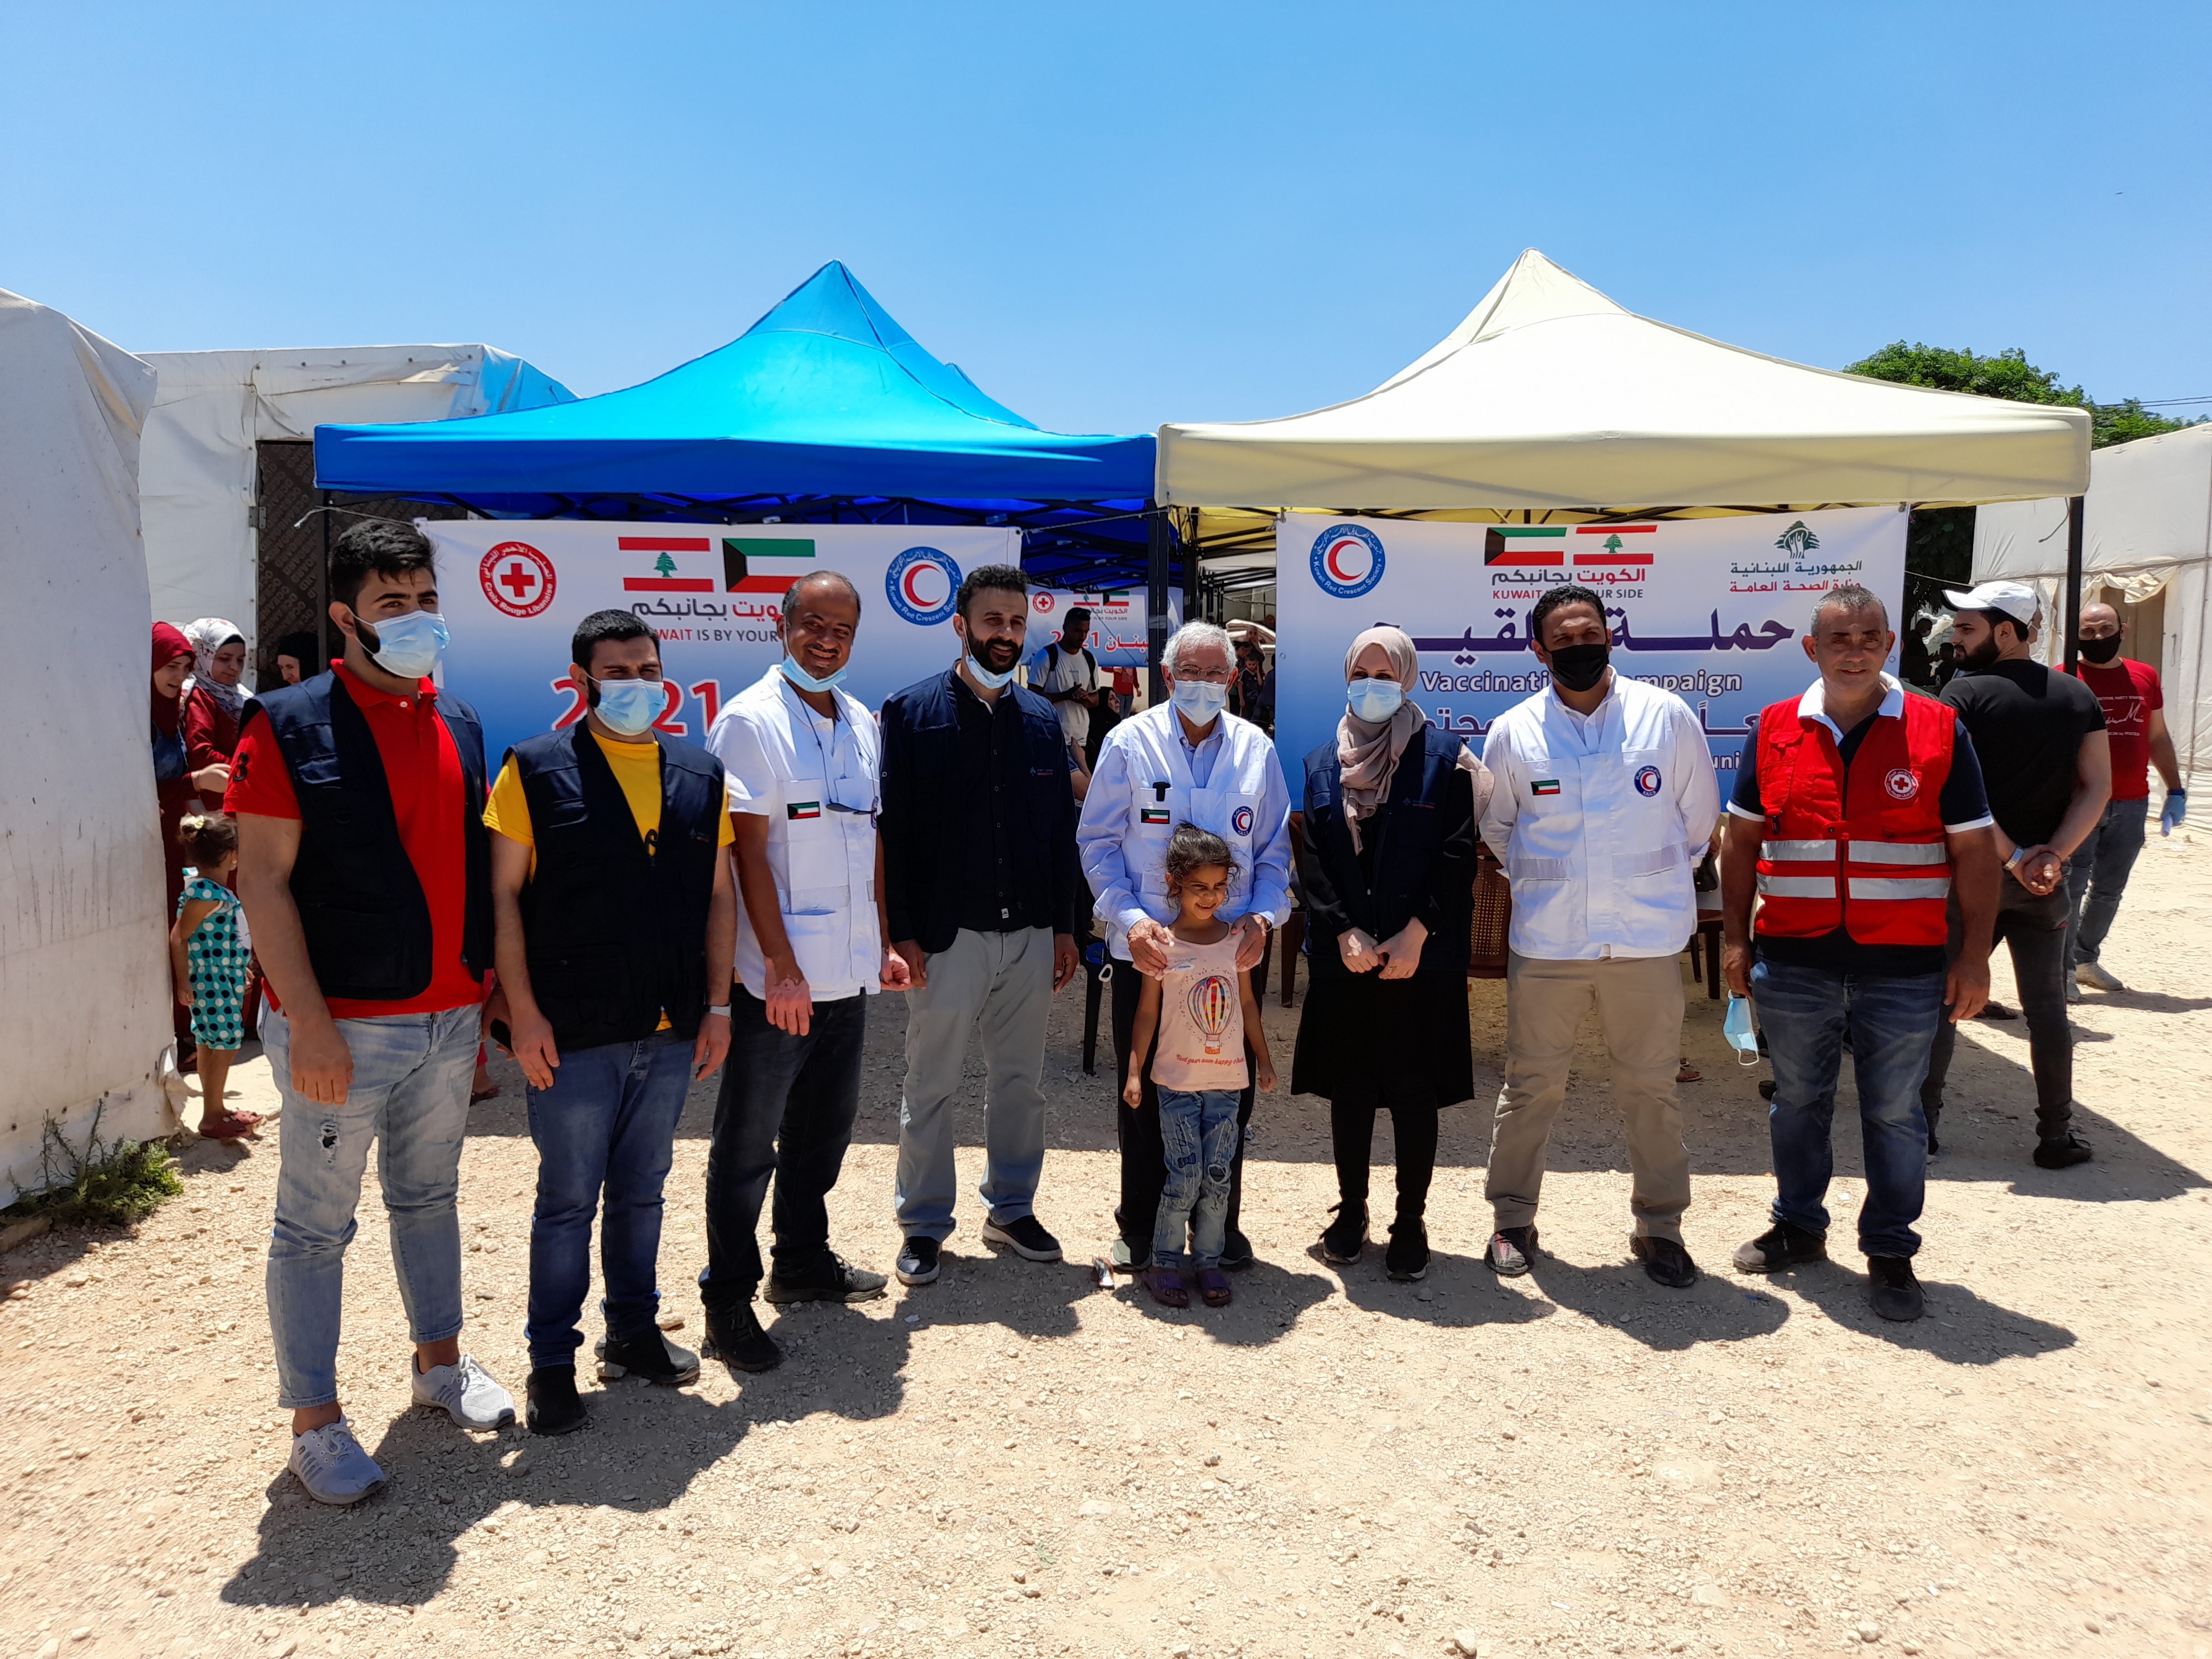 KRCS launches COVID-19 vaccination campaign for Syrian refugees in Lebanon